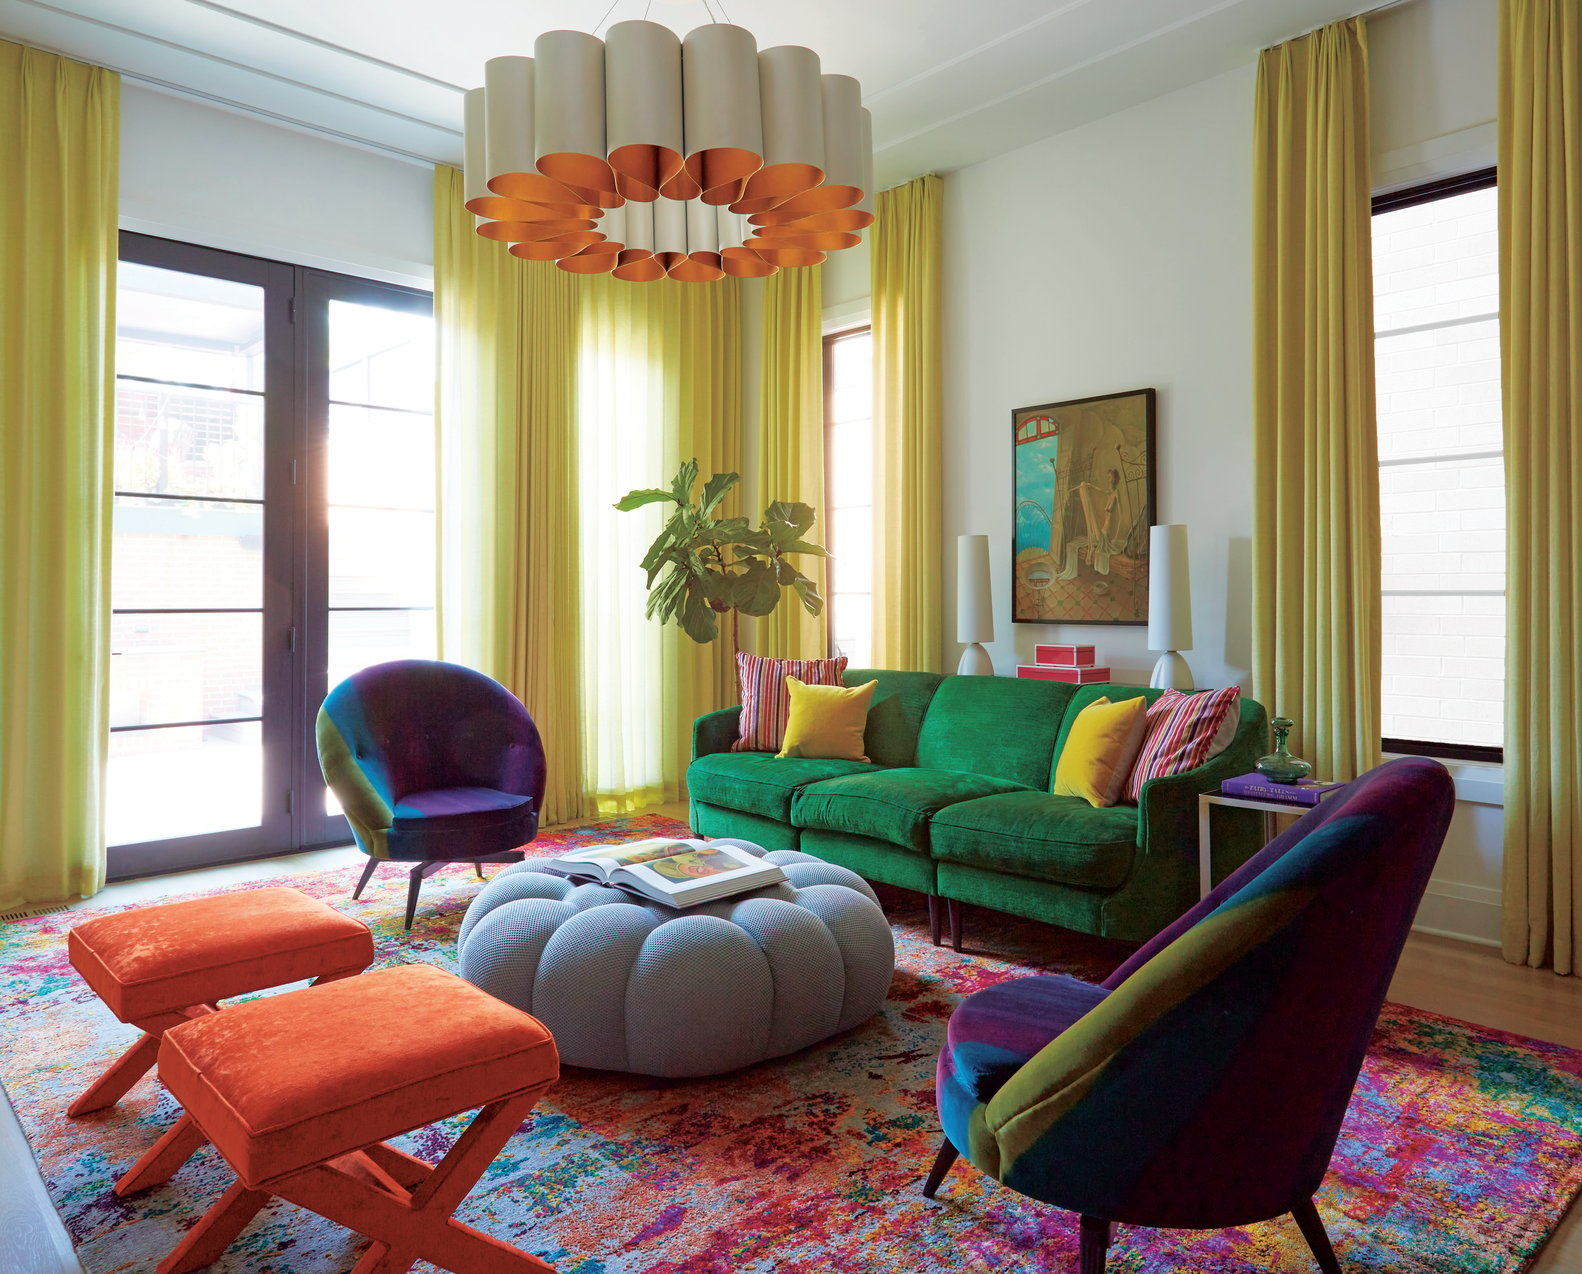 A colorful living room with a plush green sofa, light blue puff ottoman coffee table, two plush orange stools, and a blue, green, and purple velvet rounded chair with natural light streaming through lime green curtains. An orange and cream modern enamel chandelier centers the room over a multicolored area rug - living room design by Jasmin Reese Interiors, Chicago, USA. 